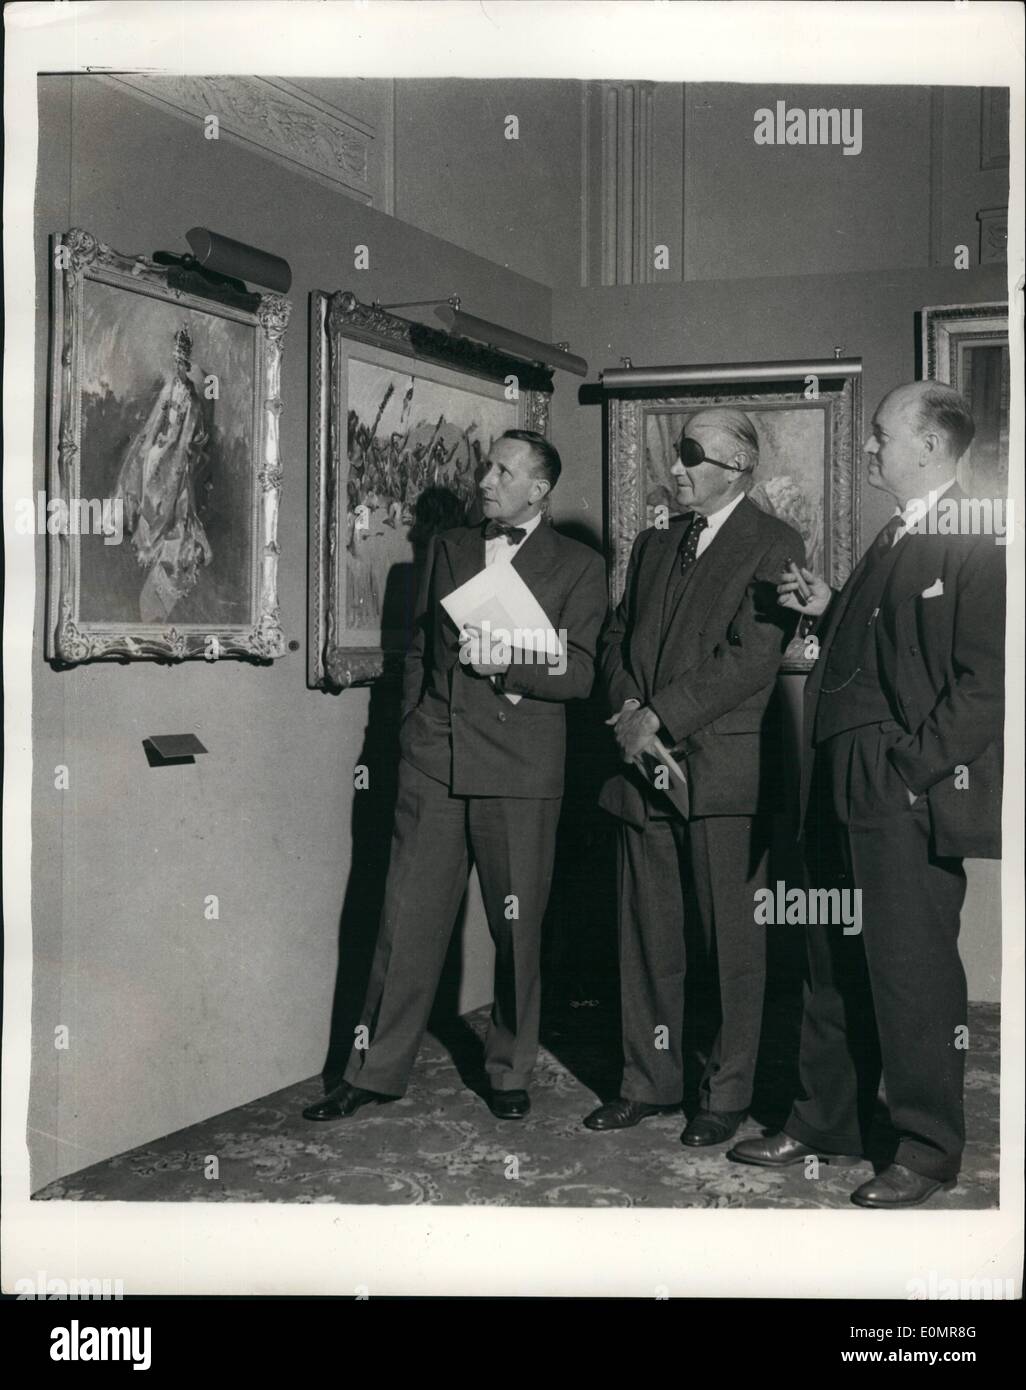 May 05, 1956 - Private vew of ''Pictures of an Industry'' Exhibition.: ''Picture of an Industry'' - an Exhibition of paintings by terence Cuneo, commissioned by the Inco-Mond Nickel Group of Companies, opens today at Grosvenor House. Photo shows (l to r): Terence Cuneo, the artist, showing his famous painting of H.N. The Queen wearing Coronation Crown - to Mr. Lewis Douglas, one time. U.S. Ambassador to Britain, and Mr. Henry S. Wingate, of New York, U.S.A., at yesterday's private view of the exhibition. Stock Photo